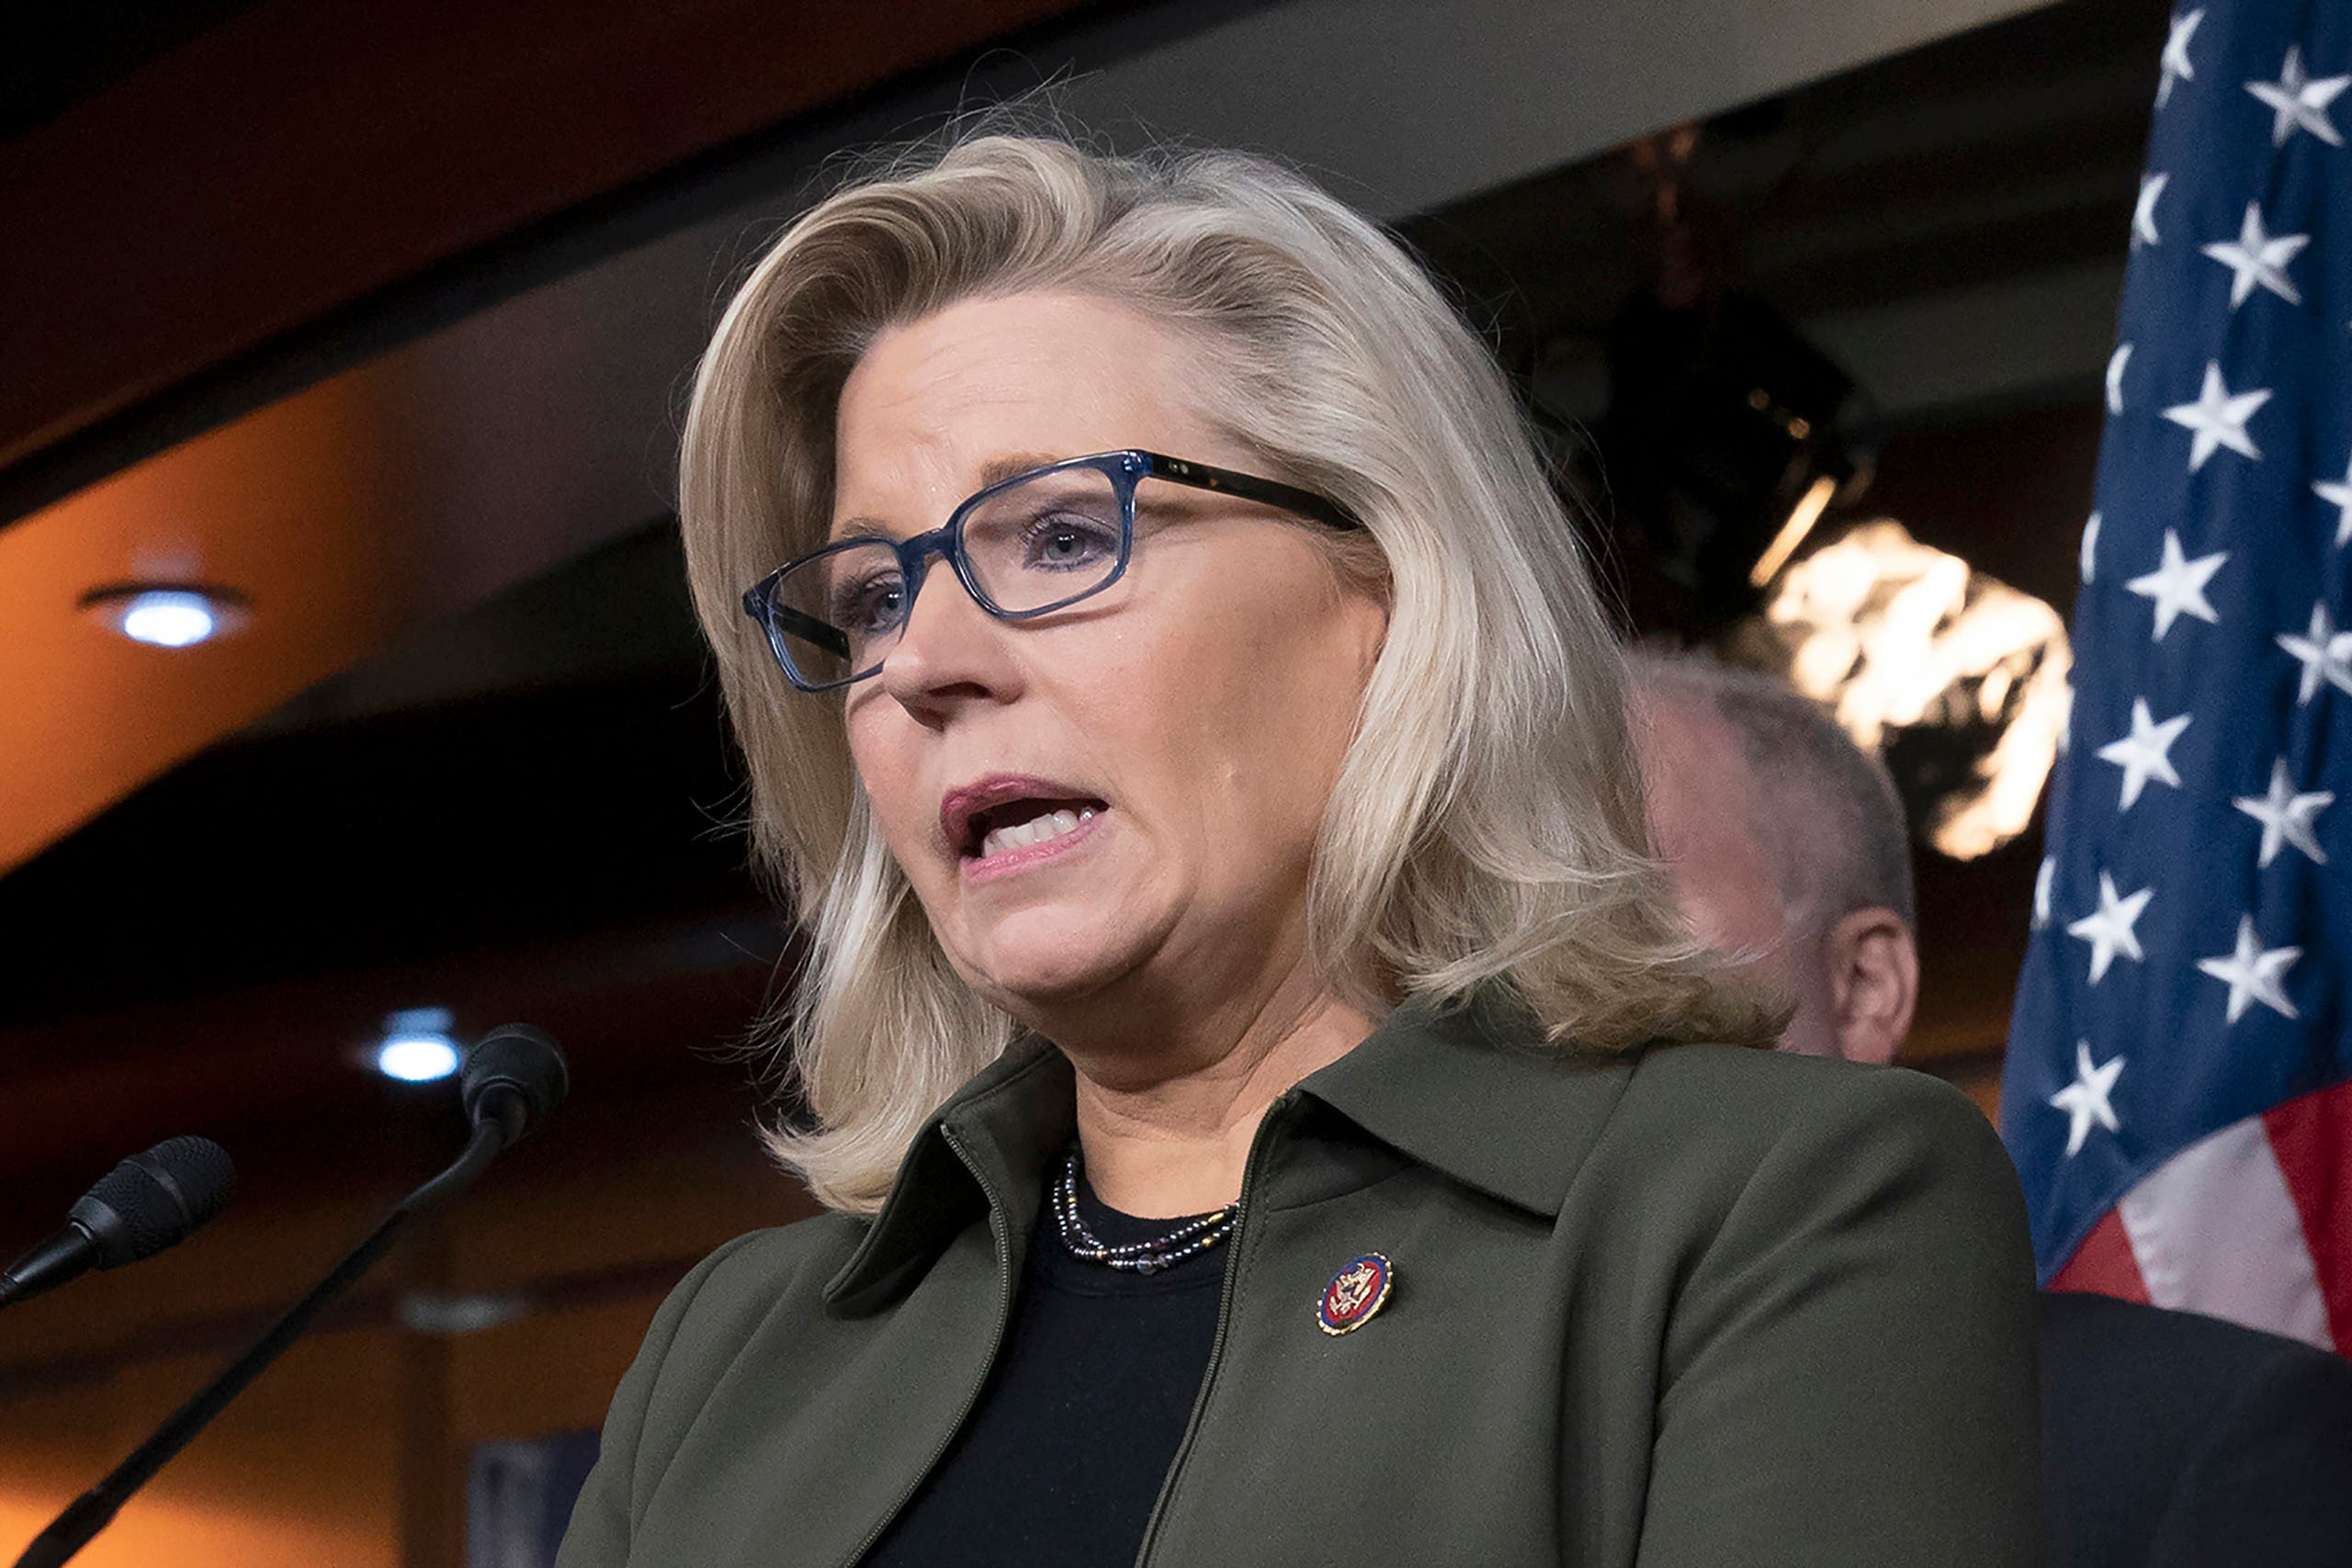 A file photo shows Rep. Liz Cheney, R-Wyo., speaks with reporters at the Capitol in Washington. (AP)